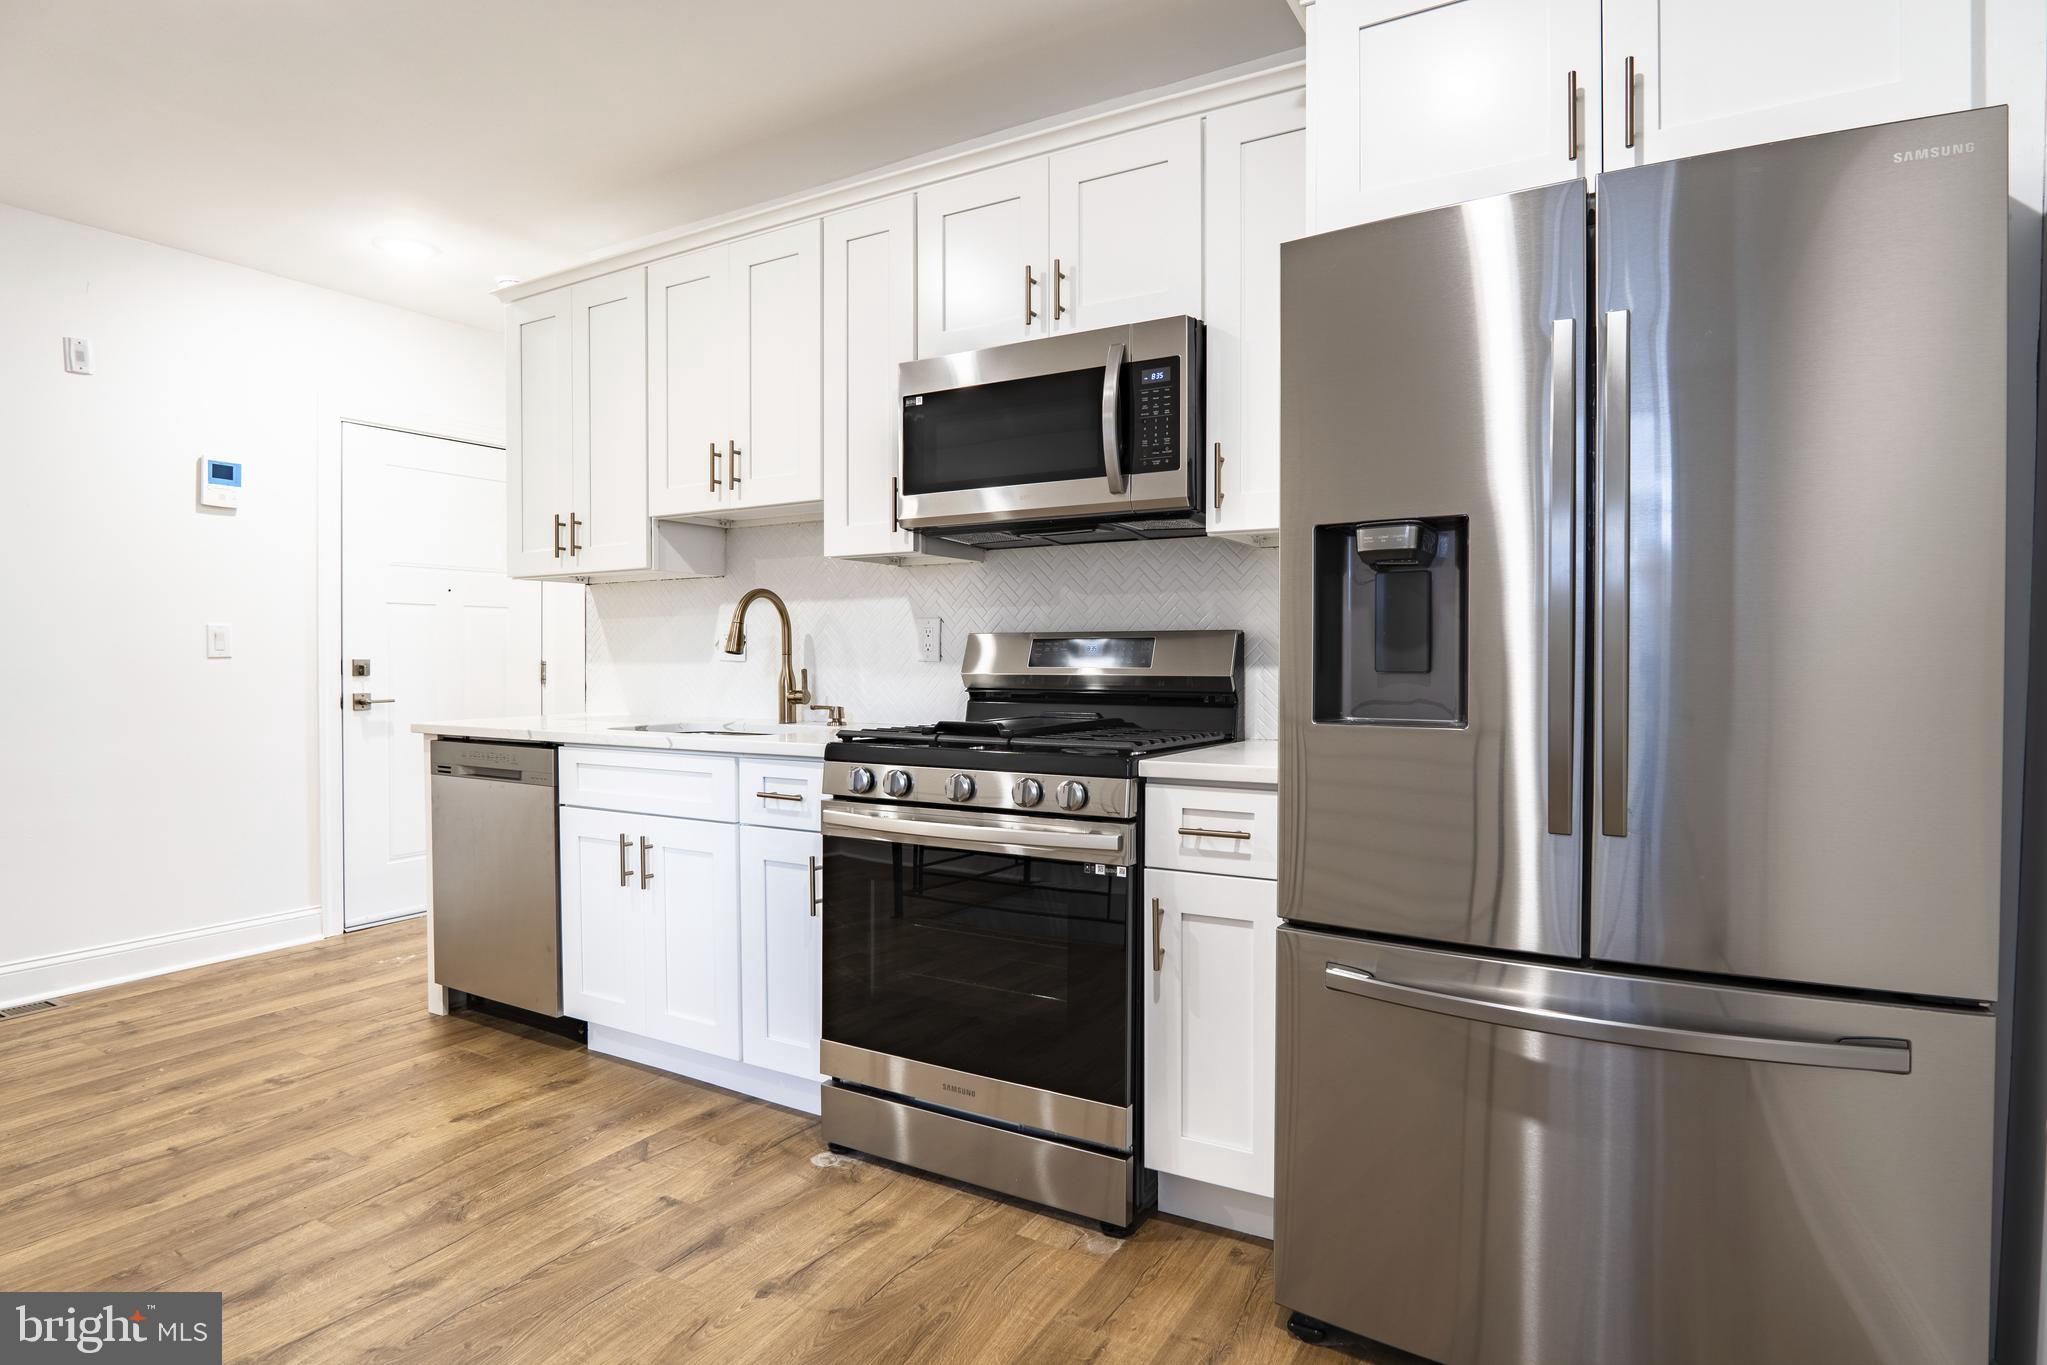 a kitchen with stainless steel appliances a refrigerator a stove top oven a sink and cabinets